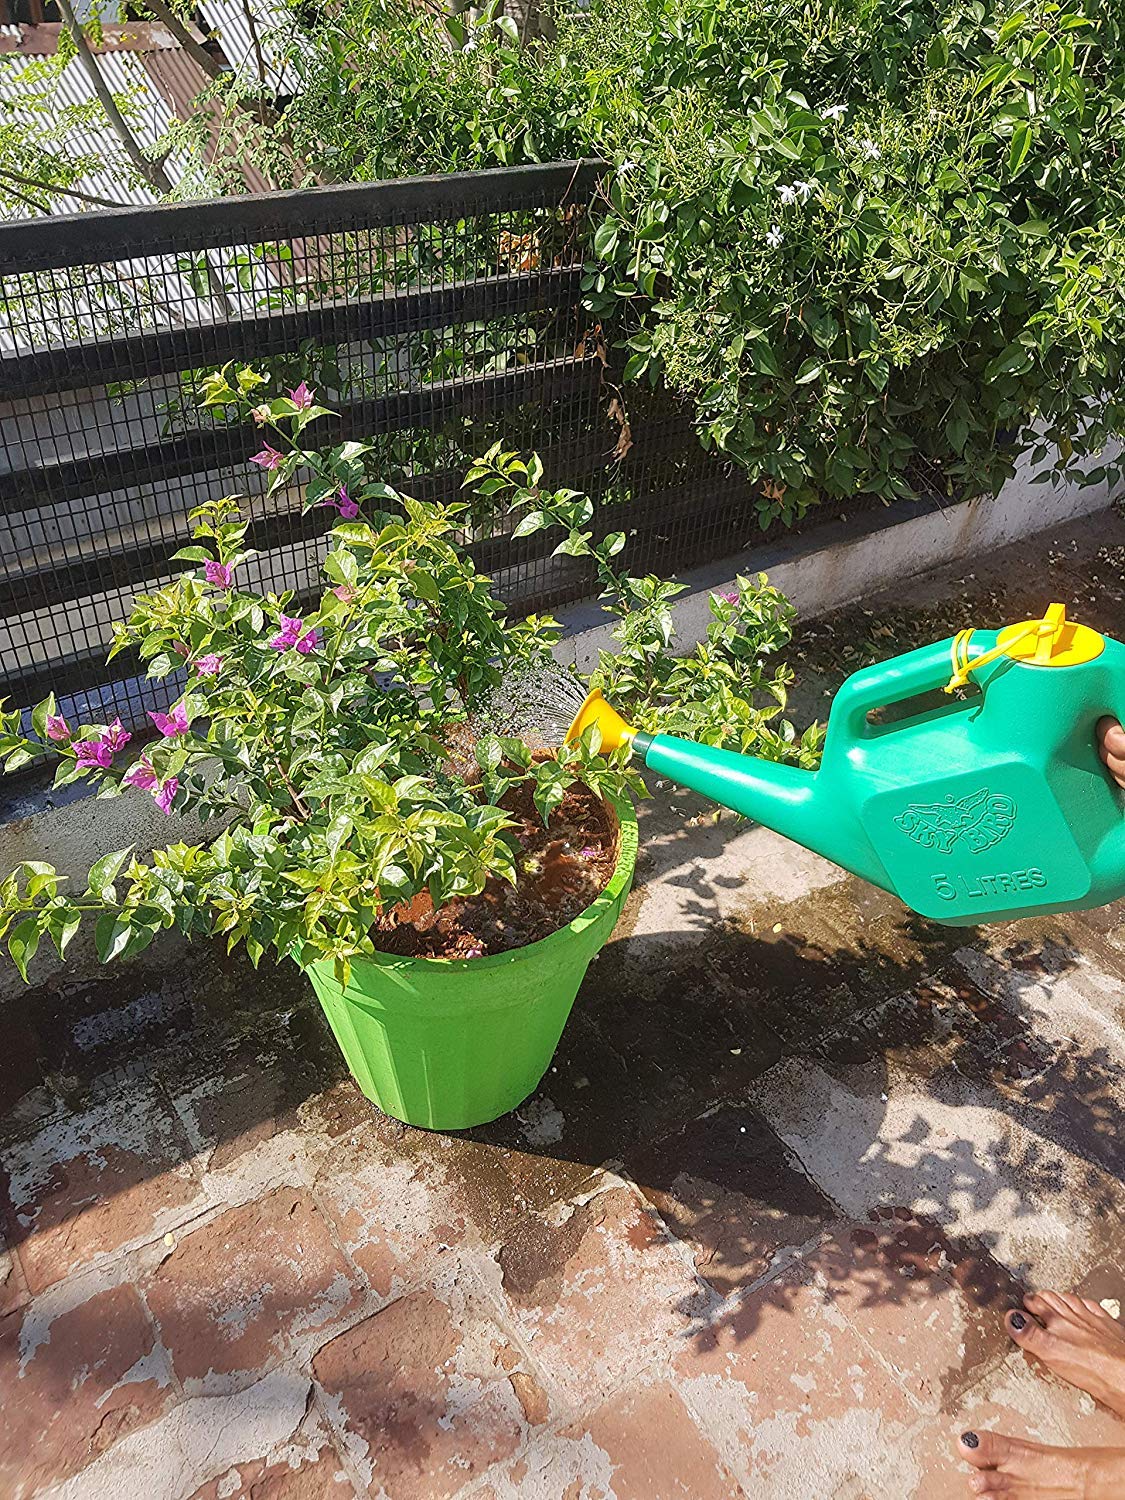 Watering Can (5-Liter) For Smooth Water and Shower Plants